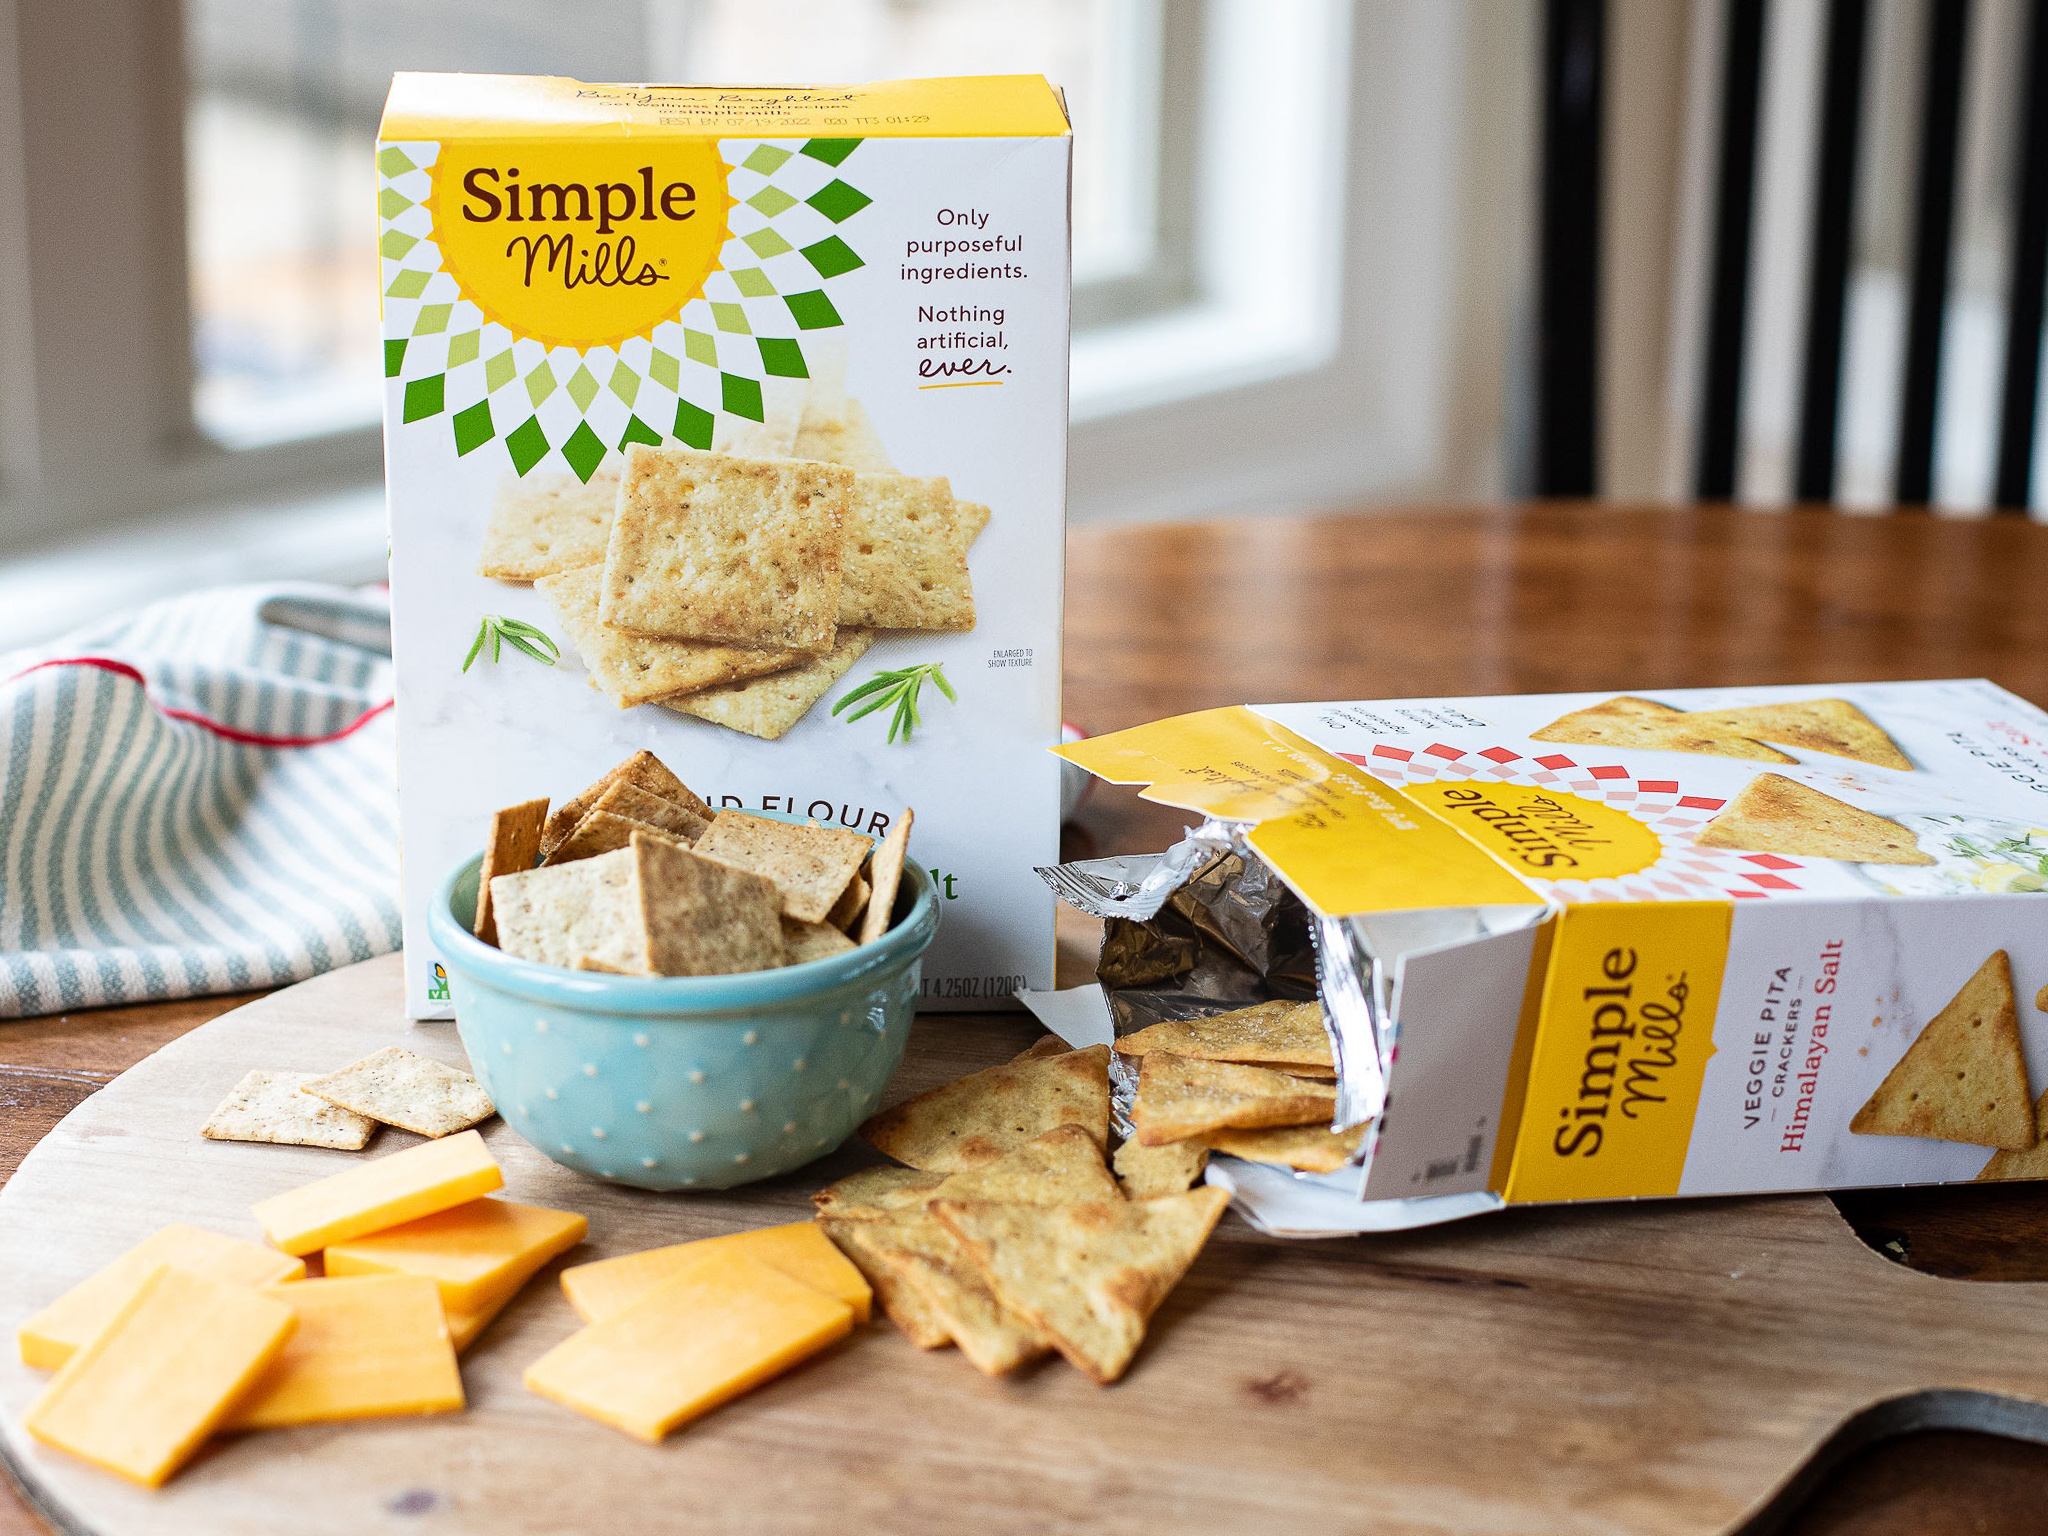 Simple Mills Crackers Are Just $2.74 At Publix (Regular Price $5.19)